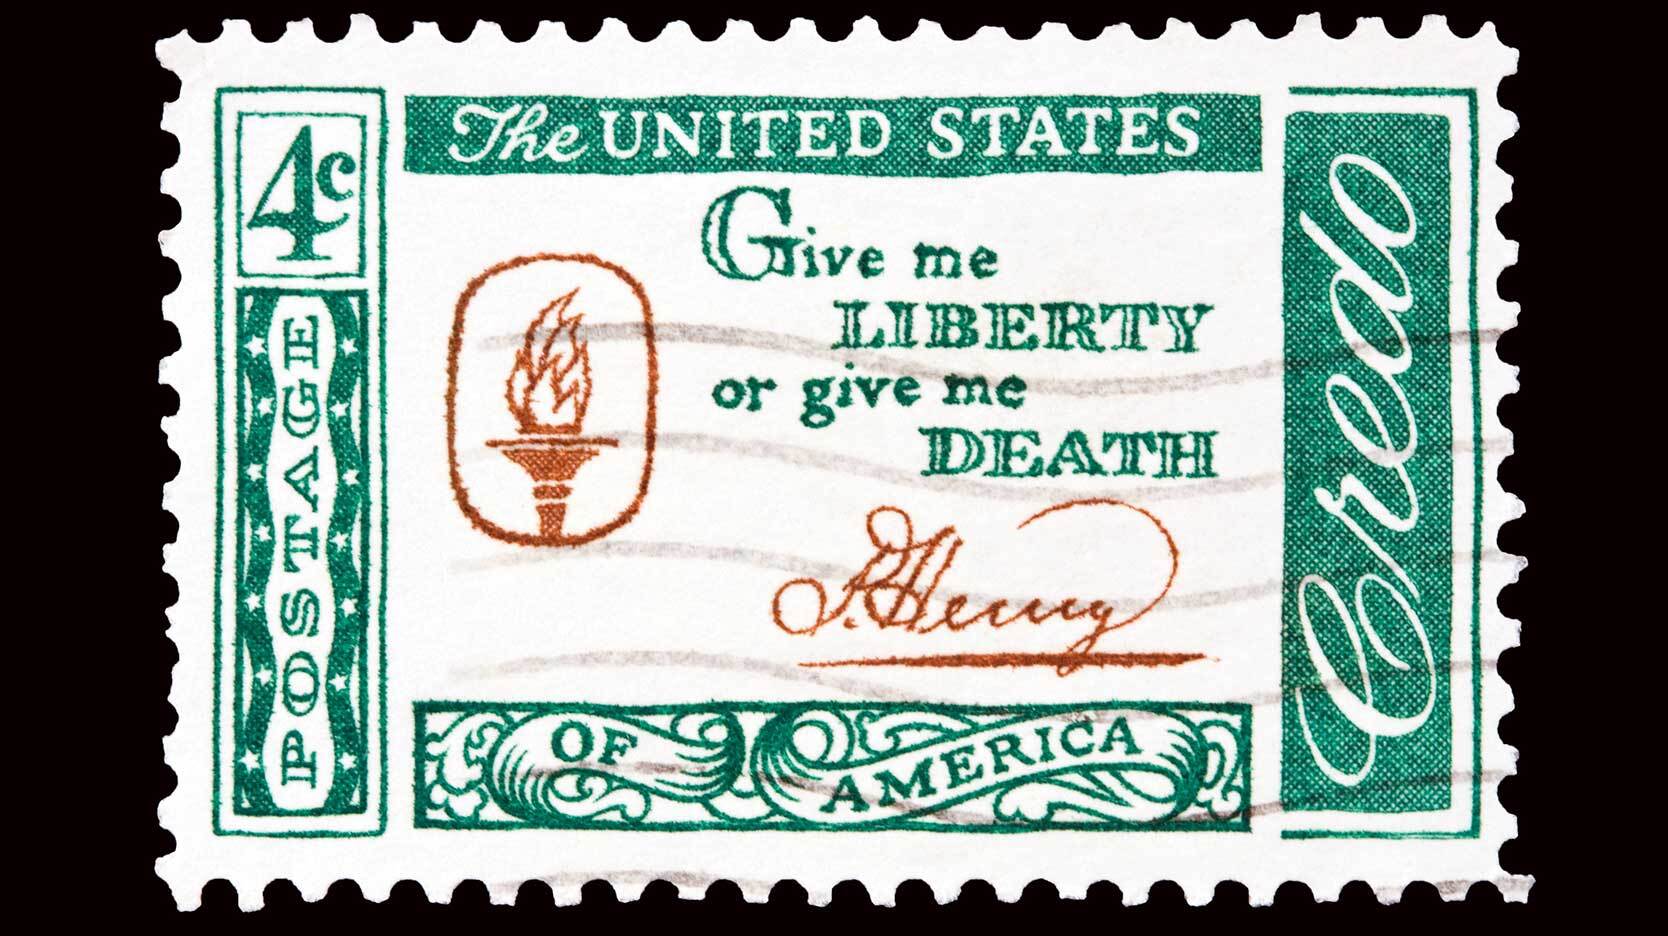 patrick henry quote on 4 cent stamp